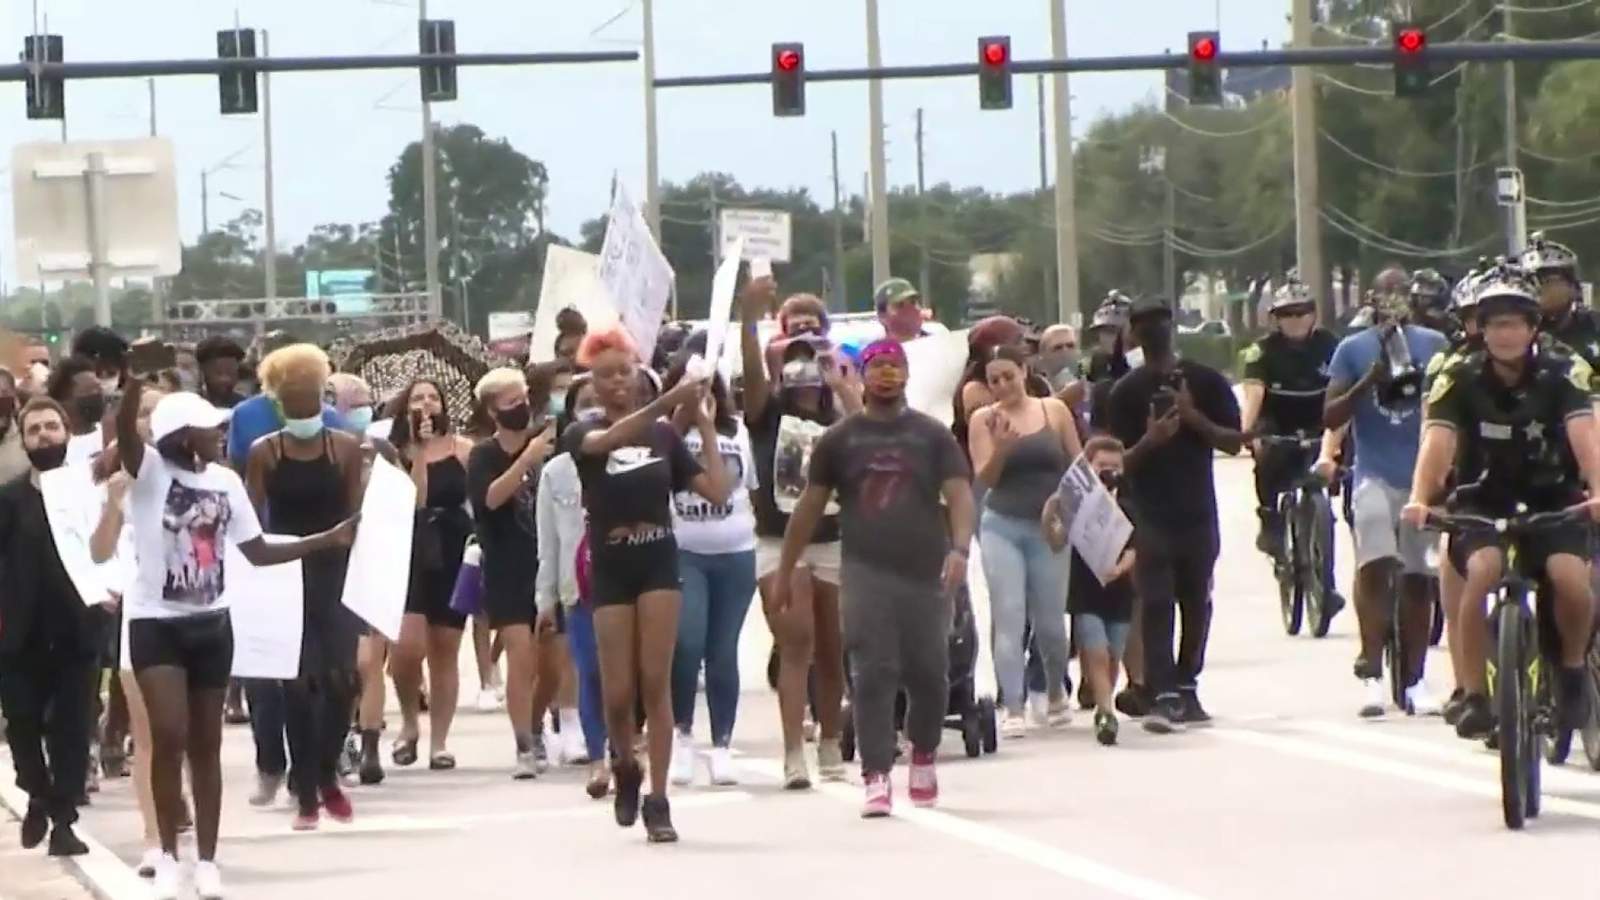 Protesters march near Florida Mall where 22-year-old was fatally shot by deputy